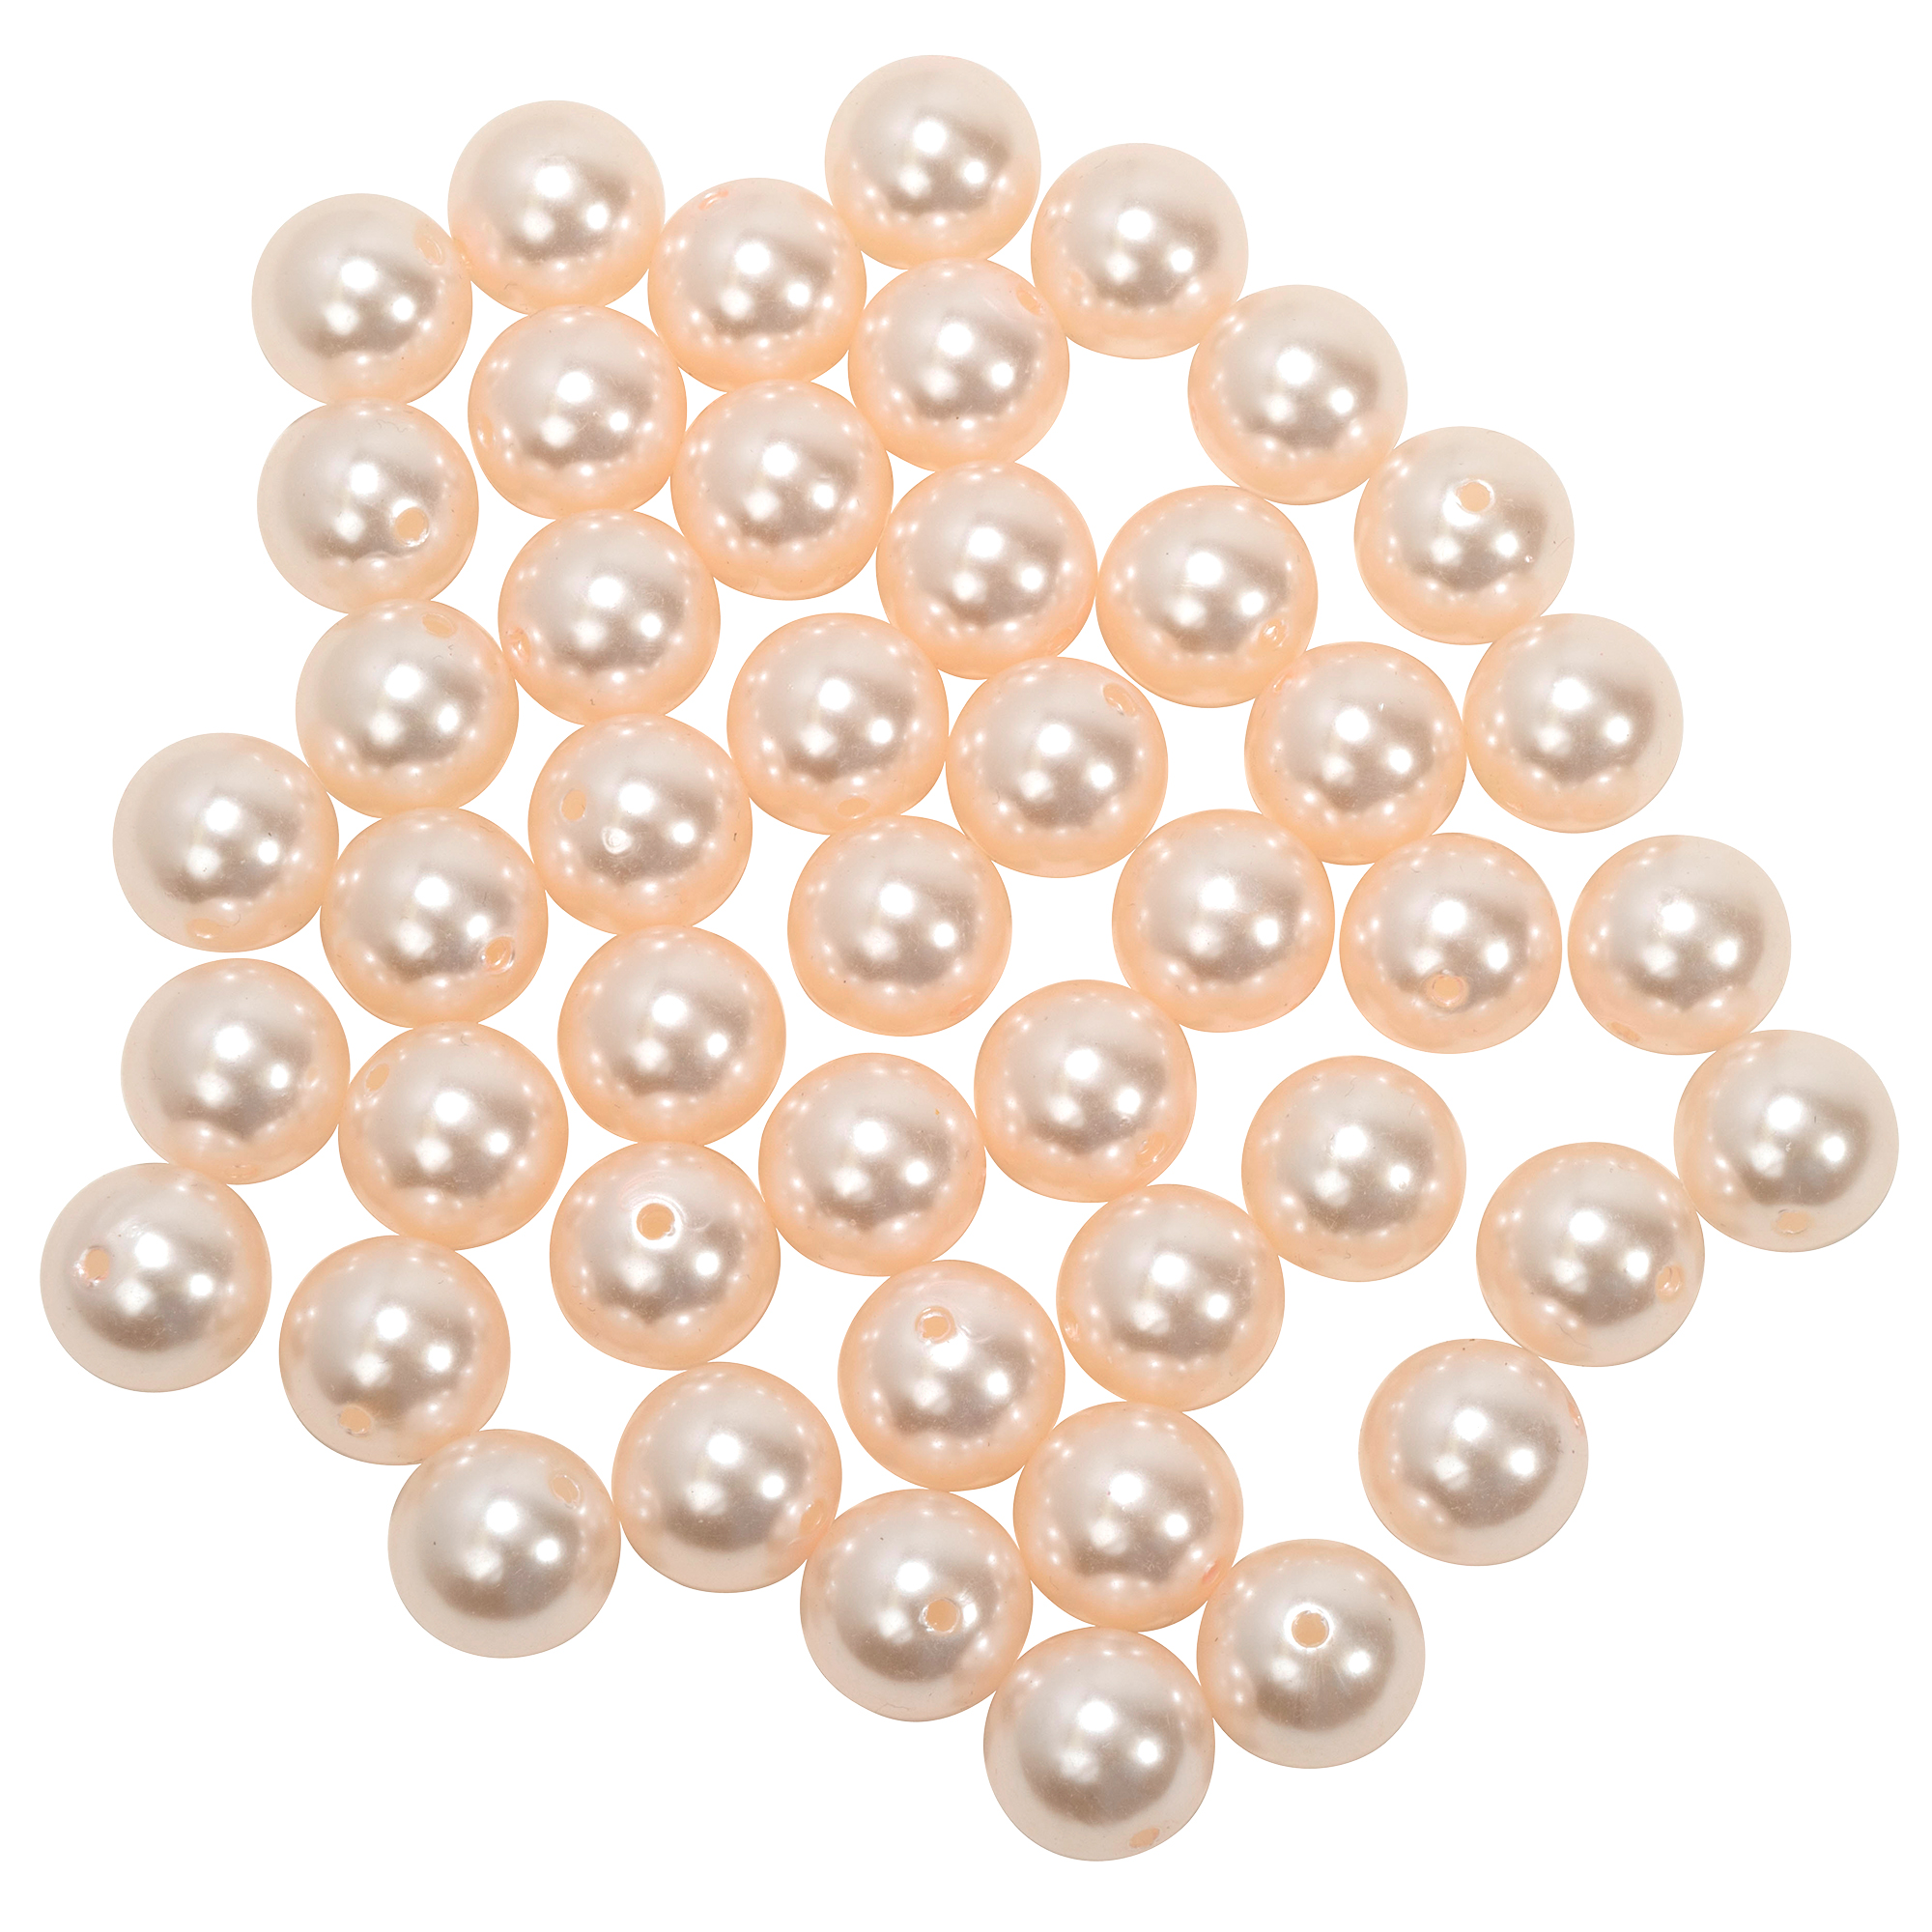 20mm Craft Pearl Beads With Hole 454g/Bag - Blush